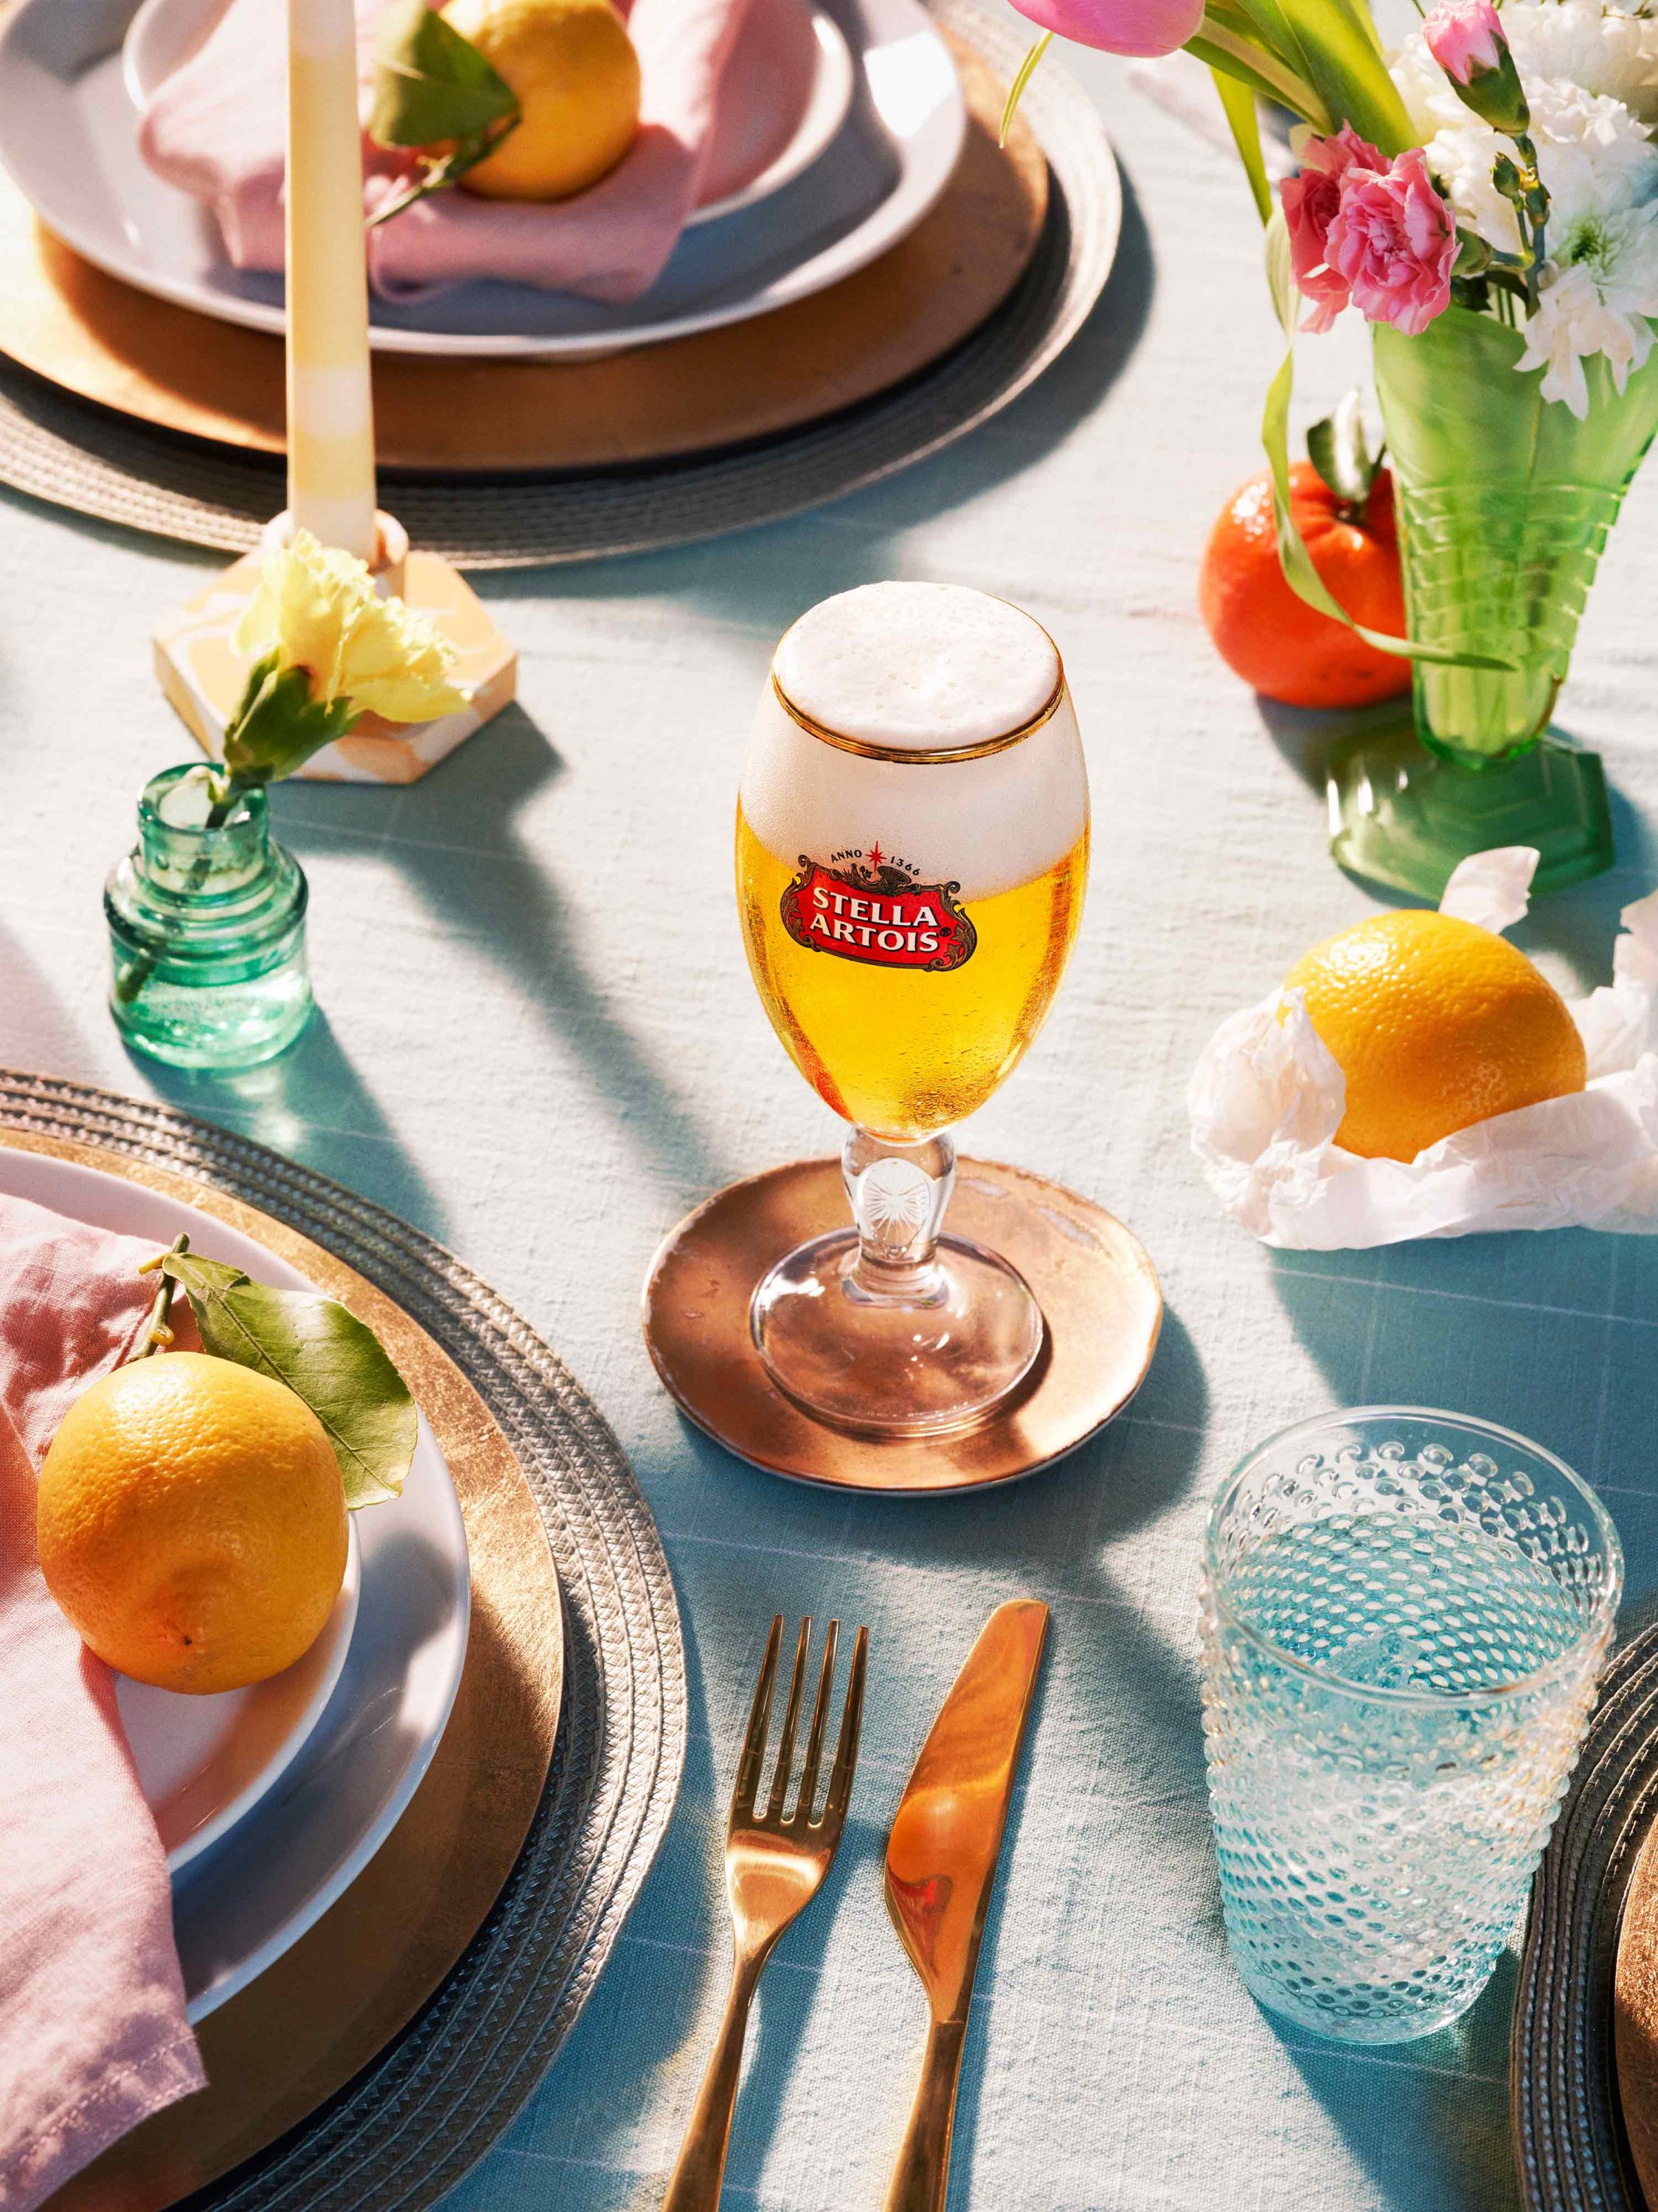 WAS_StellaArtois_Tablescapes_AlFresco_Sideview_2_V1